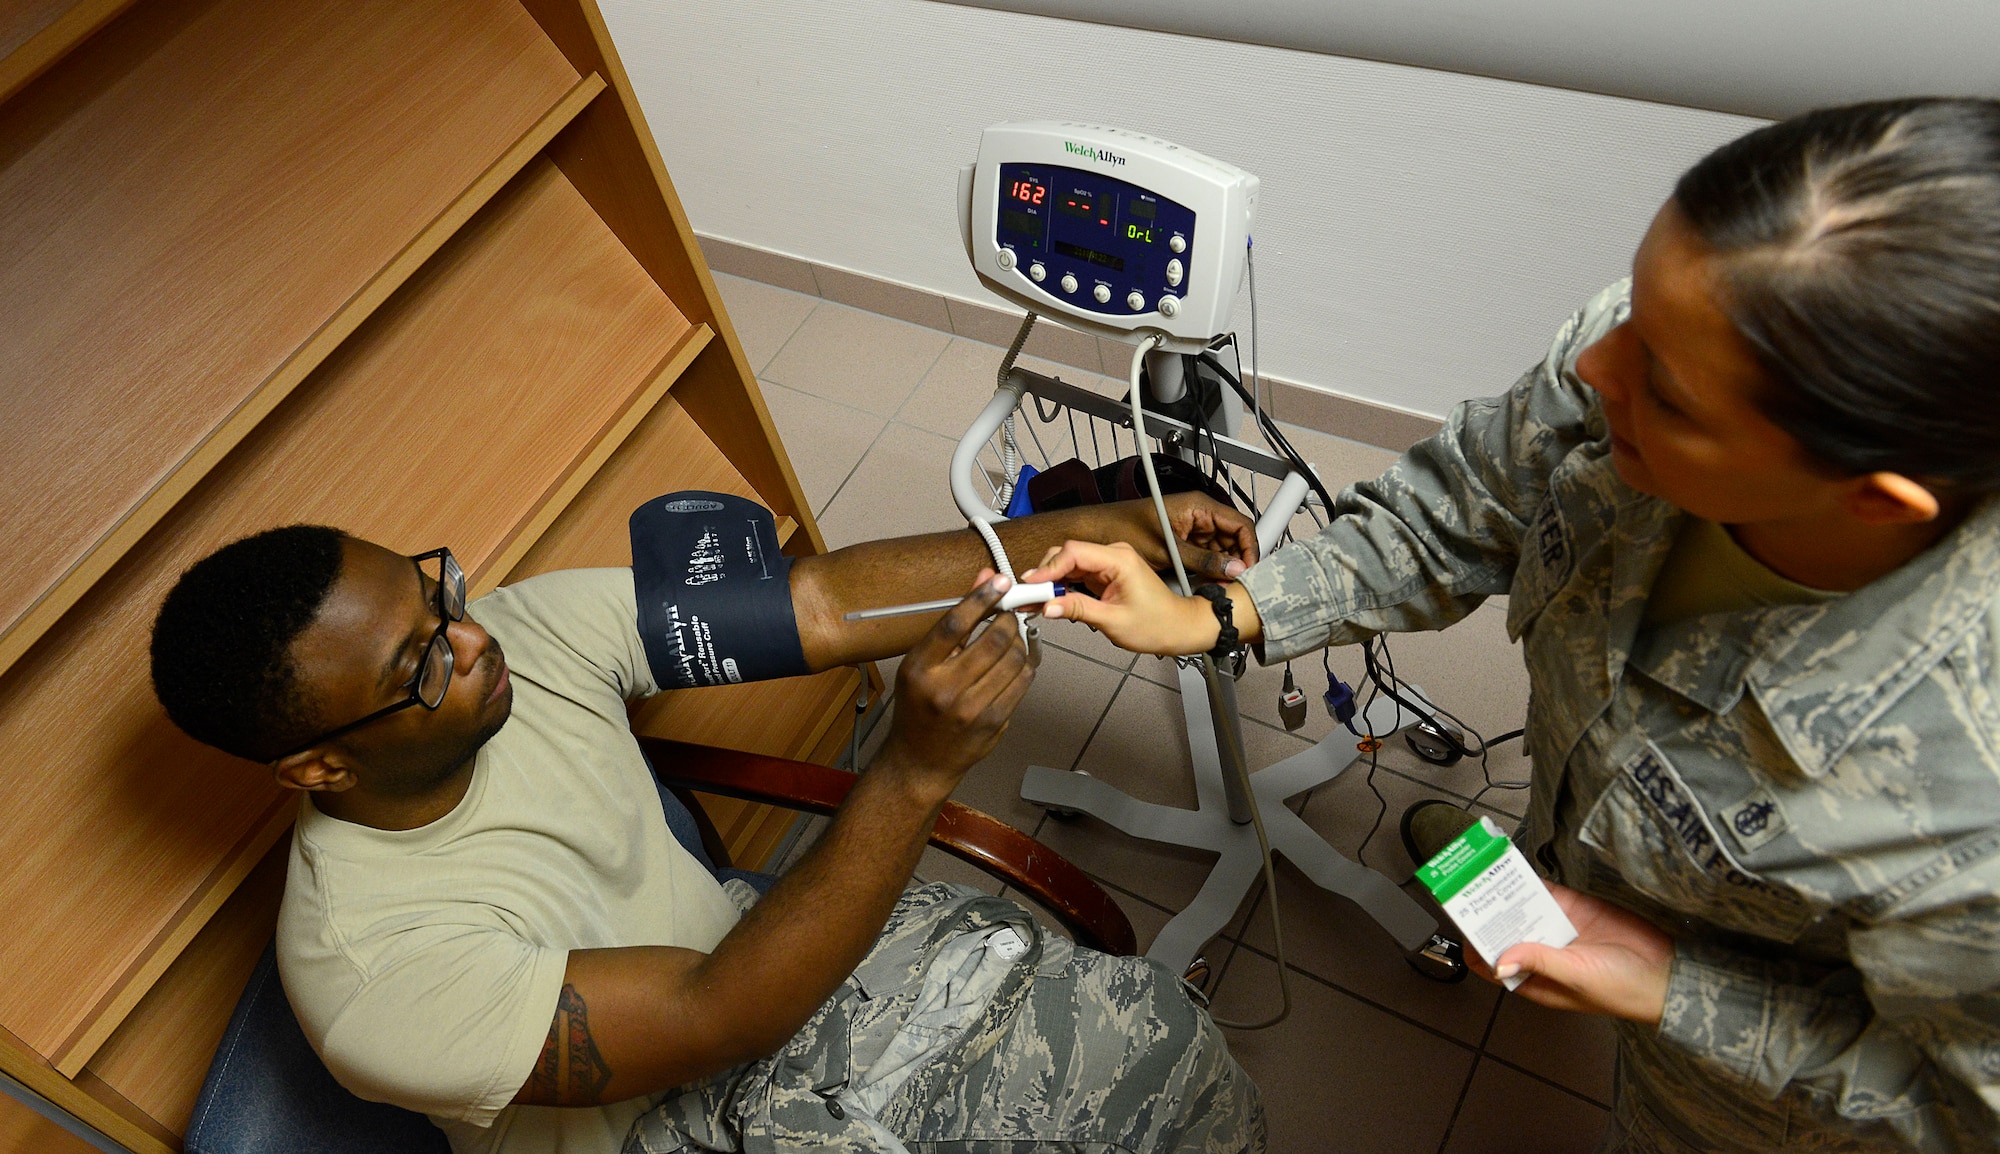 Staff Sgt. Megan Cotter, 86th Medical Operations Squadron NCO in charge of ambulance services, hands a thermometer to Senior Airman Markeith Davis, 1st Combat Communications radio frequencies transmission technician, at the Cold and Allergy Clinic at Ramstein Air Base, Germany, Nov. 4, 2015. Patients suffering from cough, congestion, runny nose, itchy eyes or other such symptoms can now be seen by a doctor much sooner than they had been able to prior to the opening of the new clinic. (U.S. Air Force photo/Airman 1st Class Tryphena Mayhugh) 